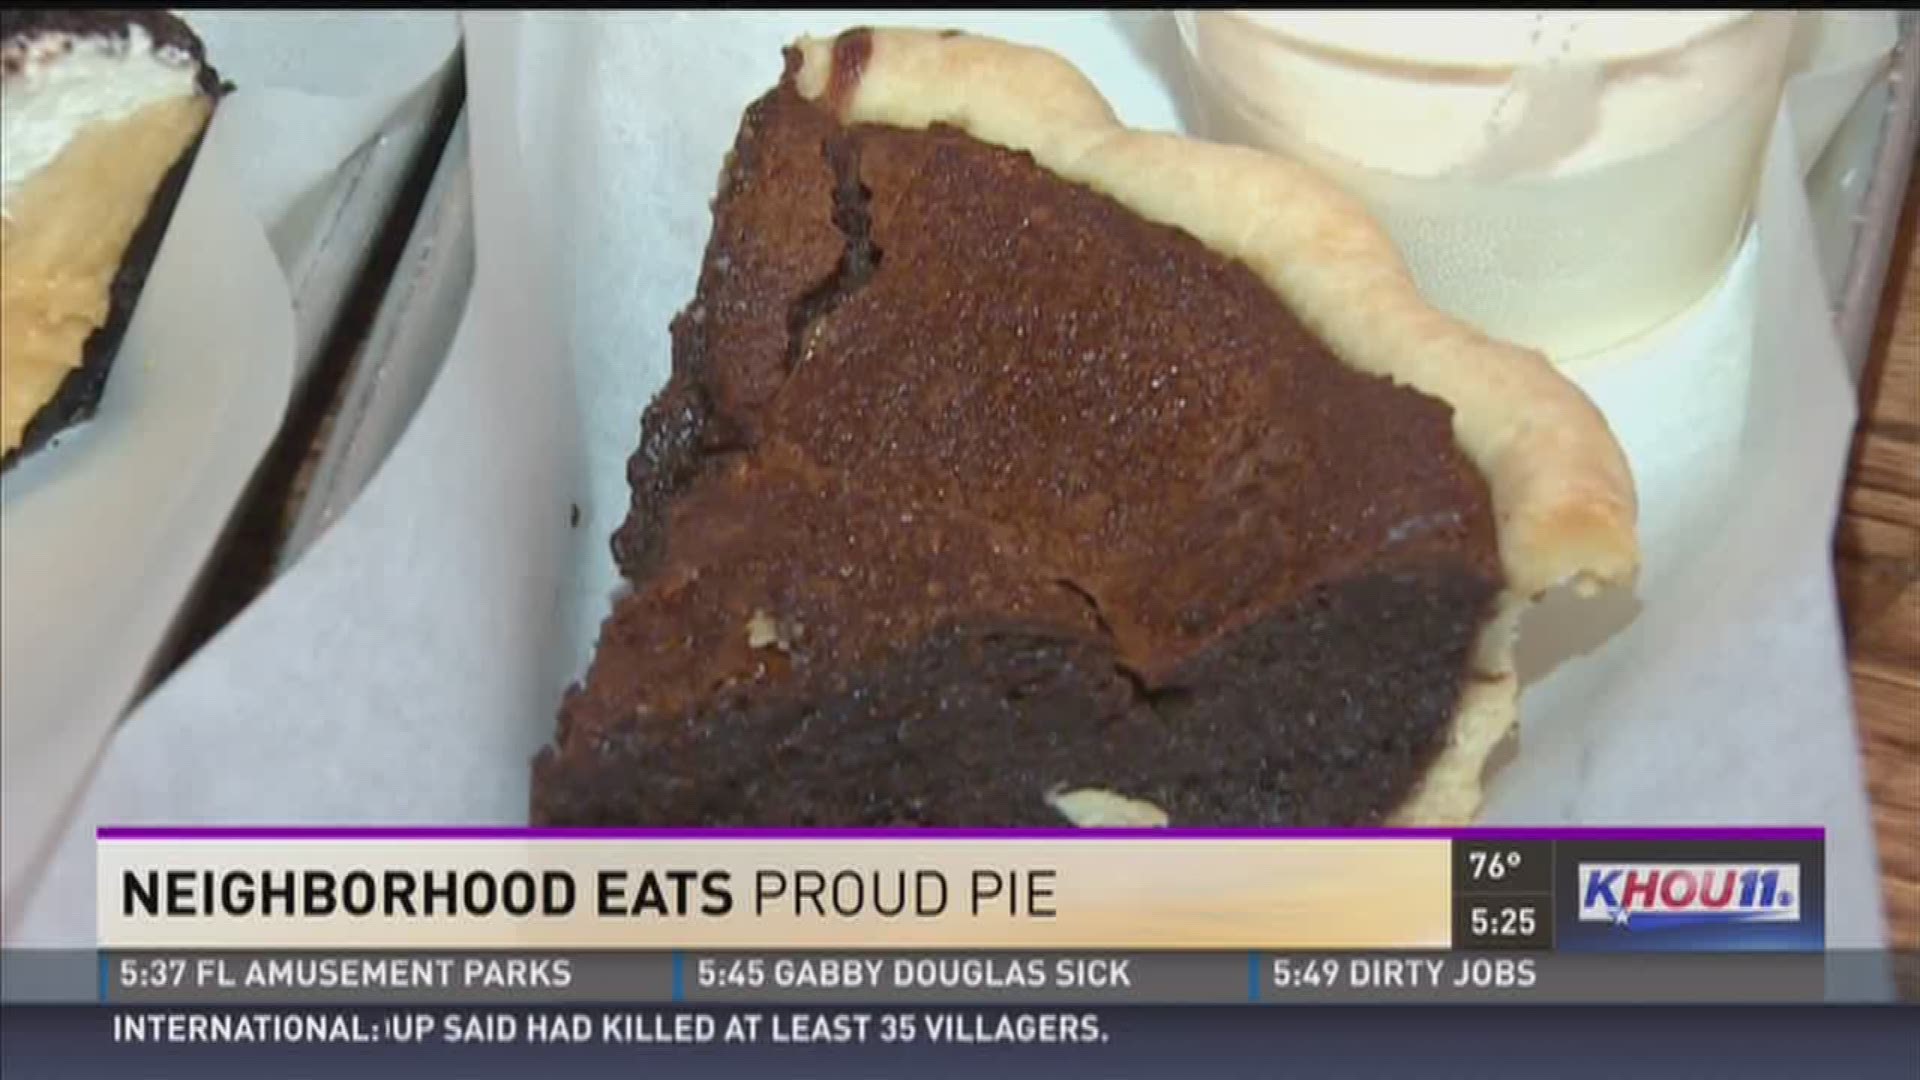 KHOU 11's Sherry Williams reports on tasty pies in this edition of Neighborhood Eats